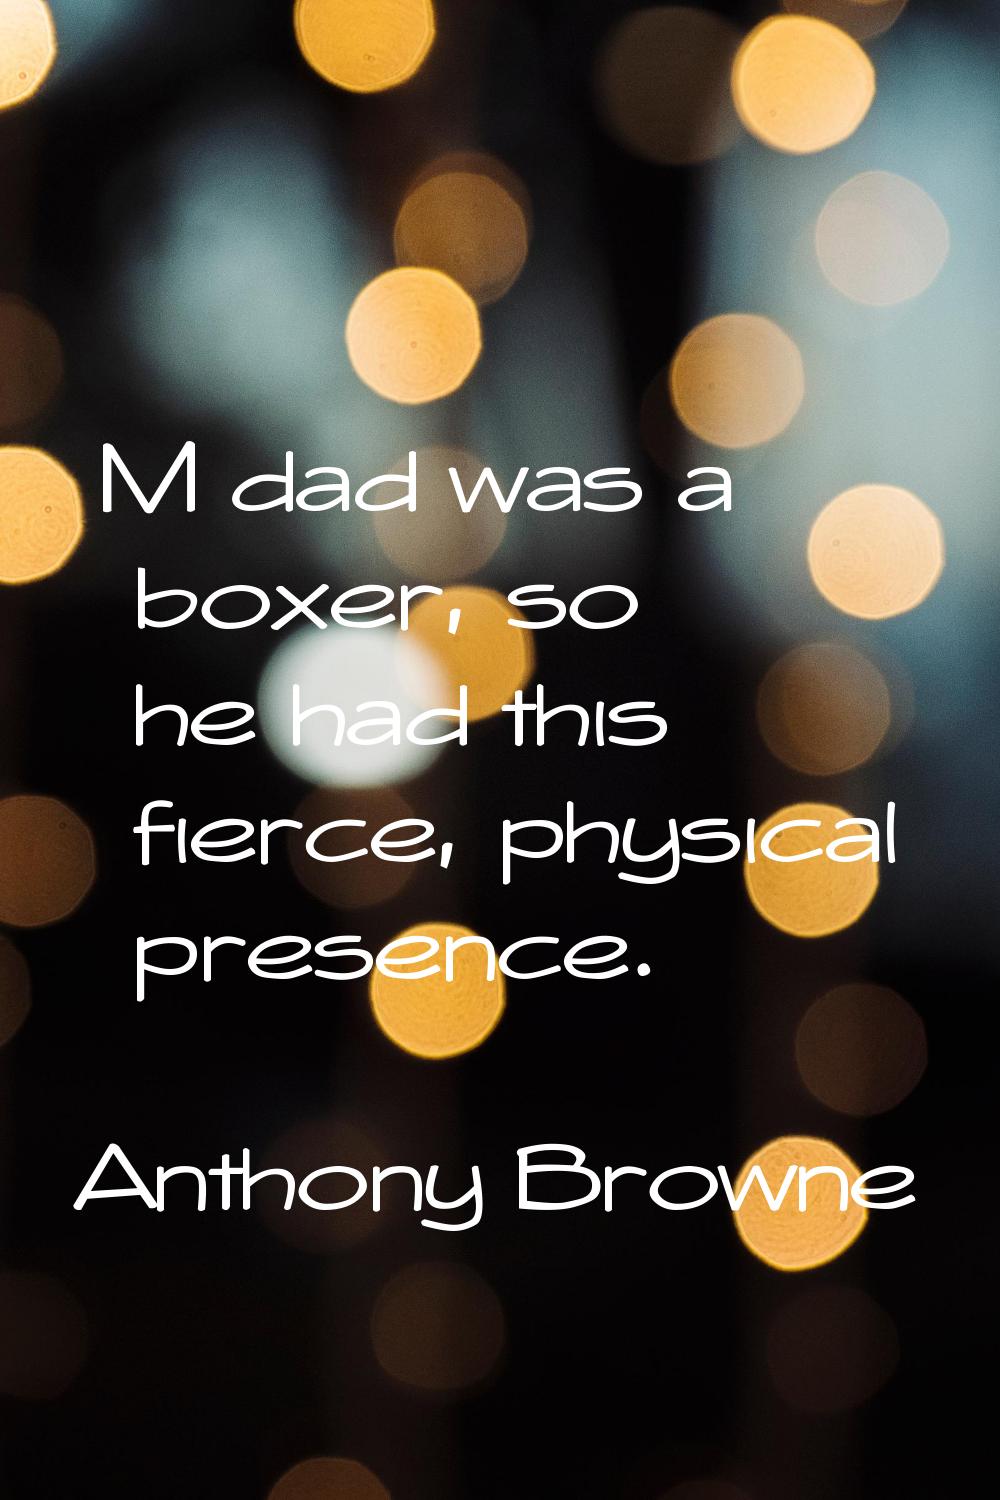 M dad was a boxer, so he had this fierce, physical presence.